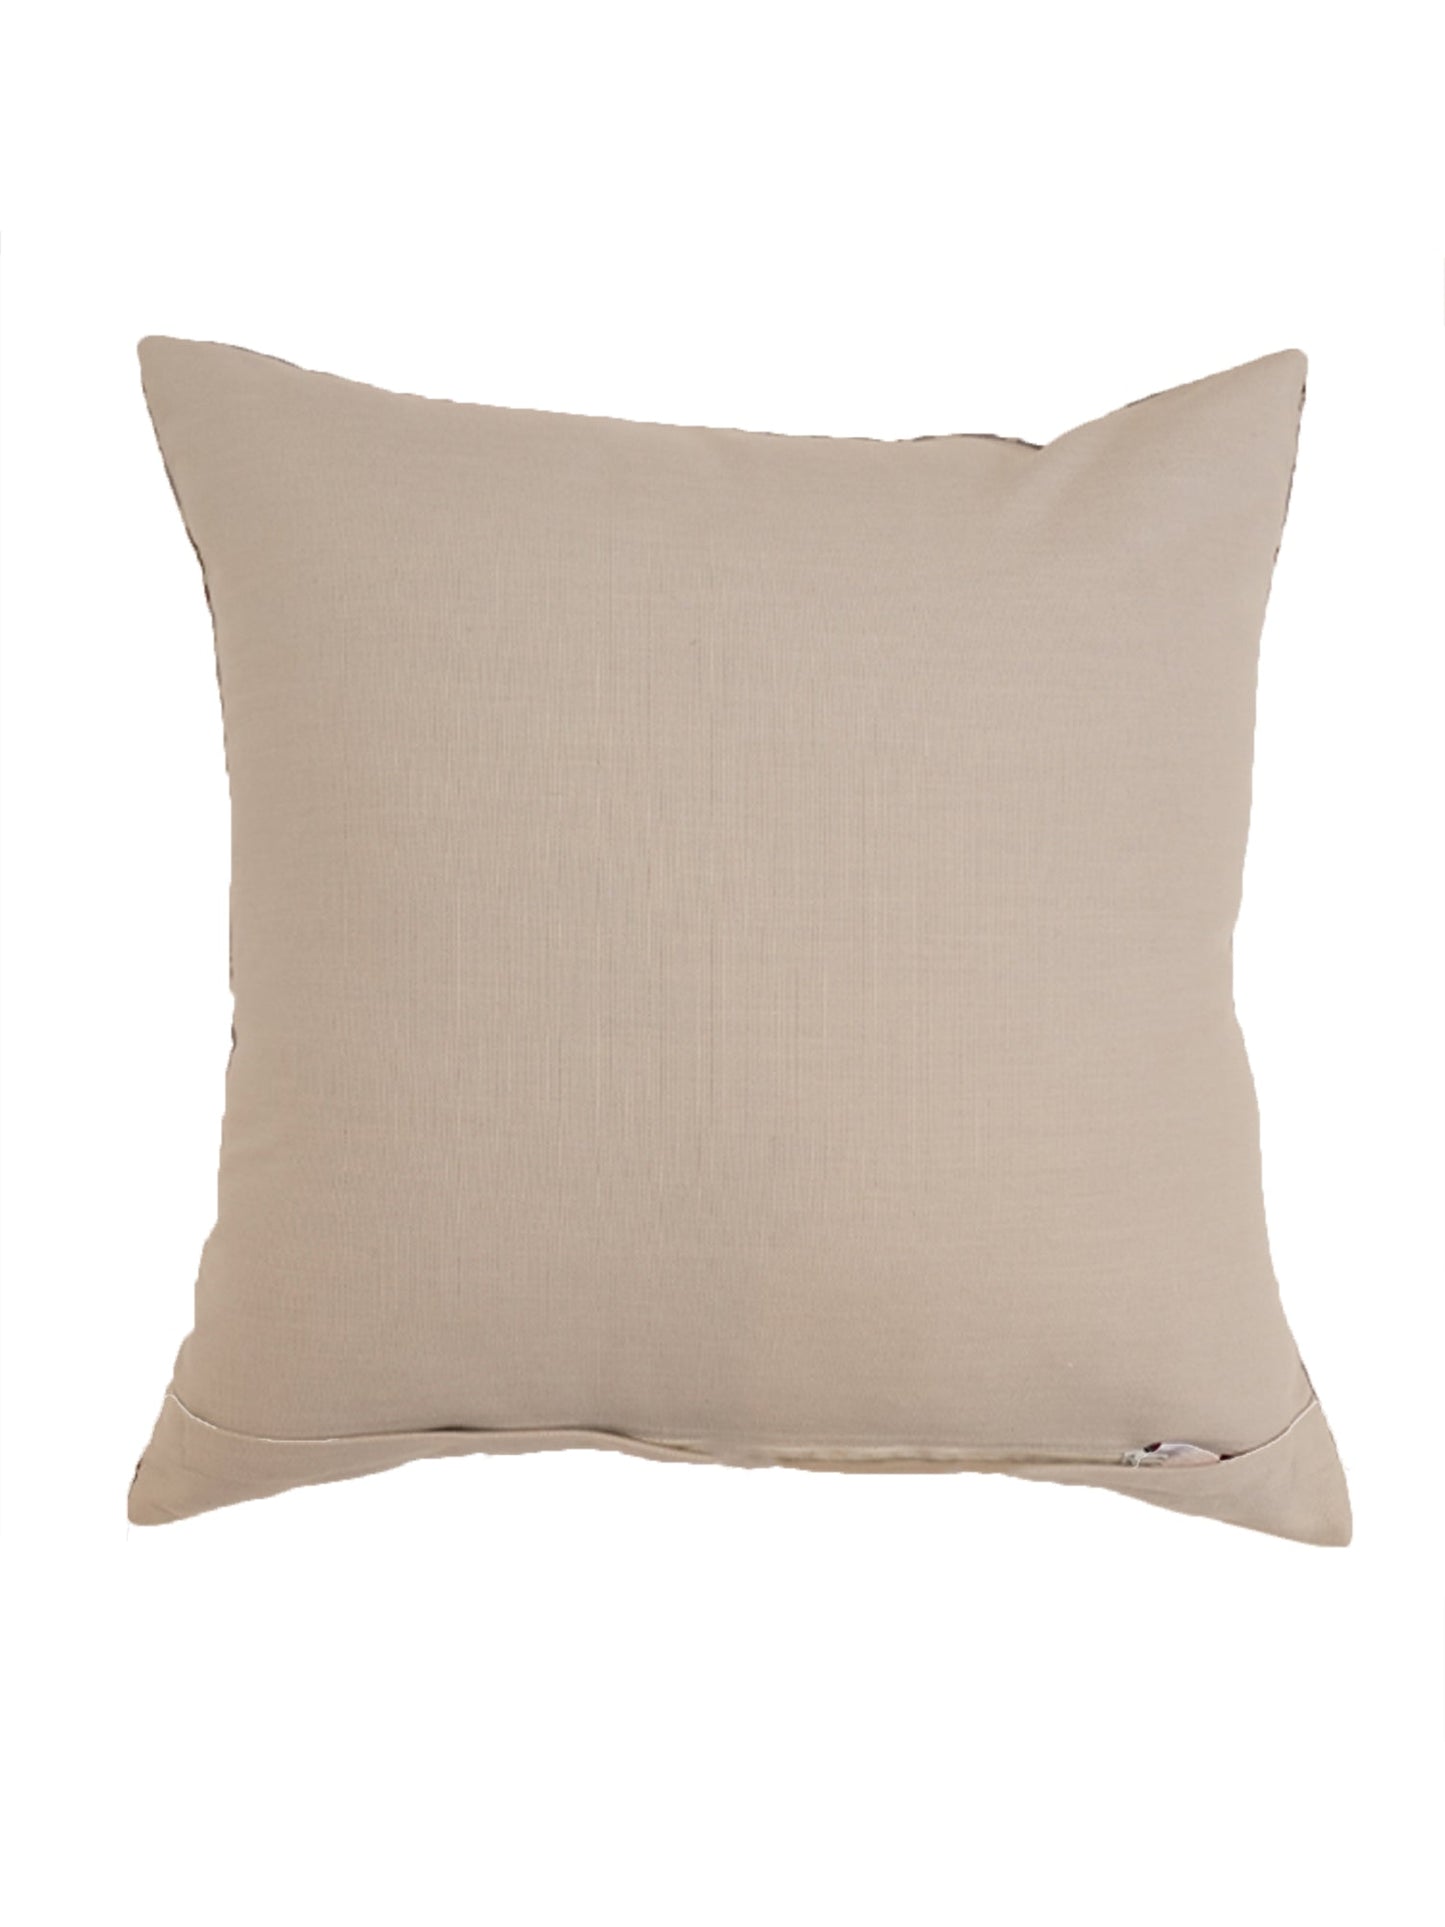 Cushion Cover with Zari Embroidery on Floral Print Polycanvas Grey - 20" X 20"